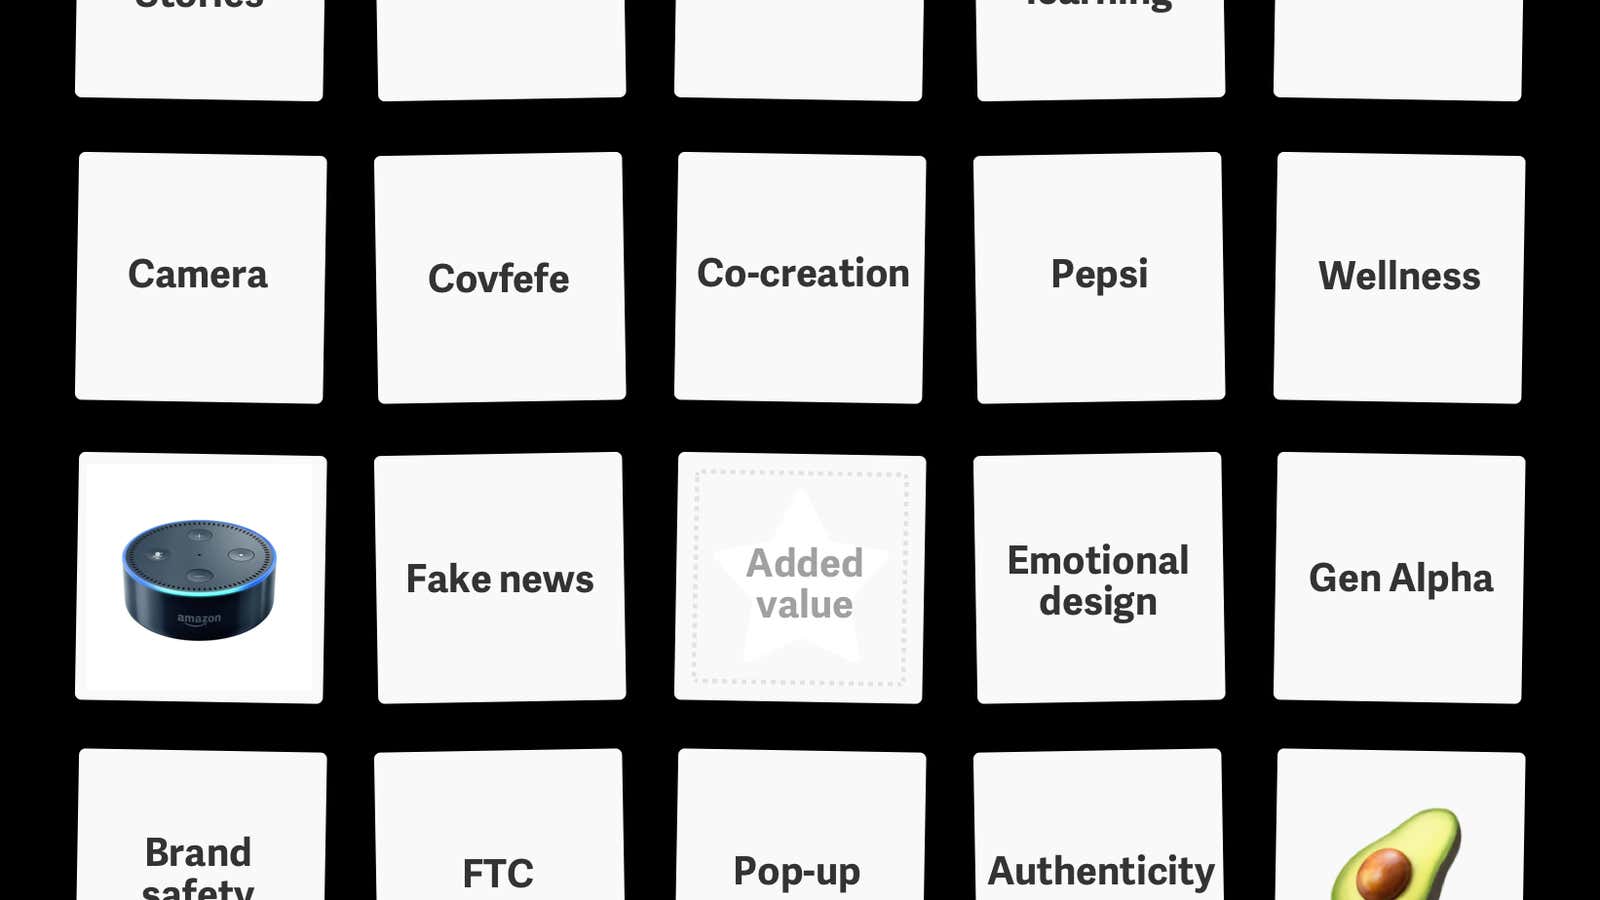 Cannes Lions bingo: The ad industry’s top buzzwords and jargon in 2017